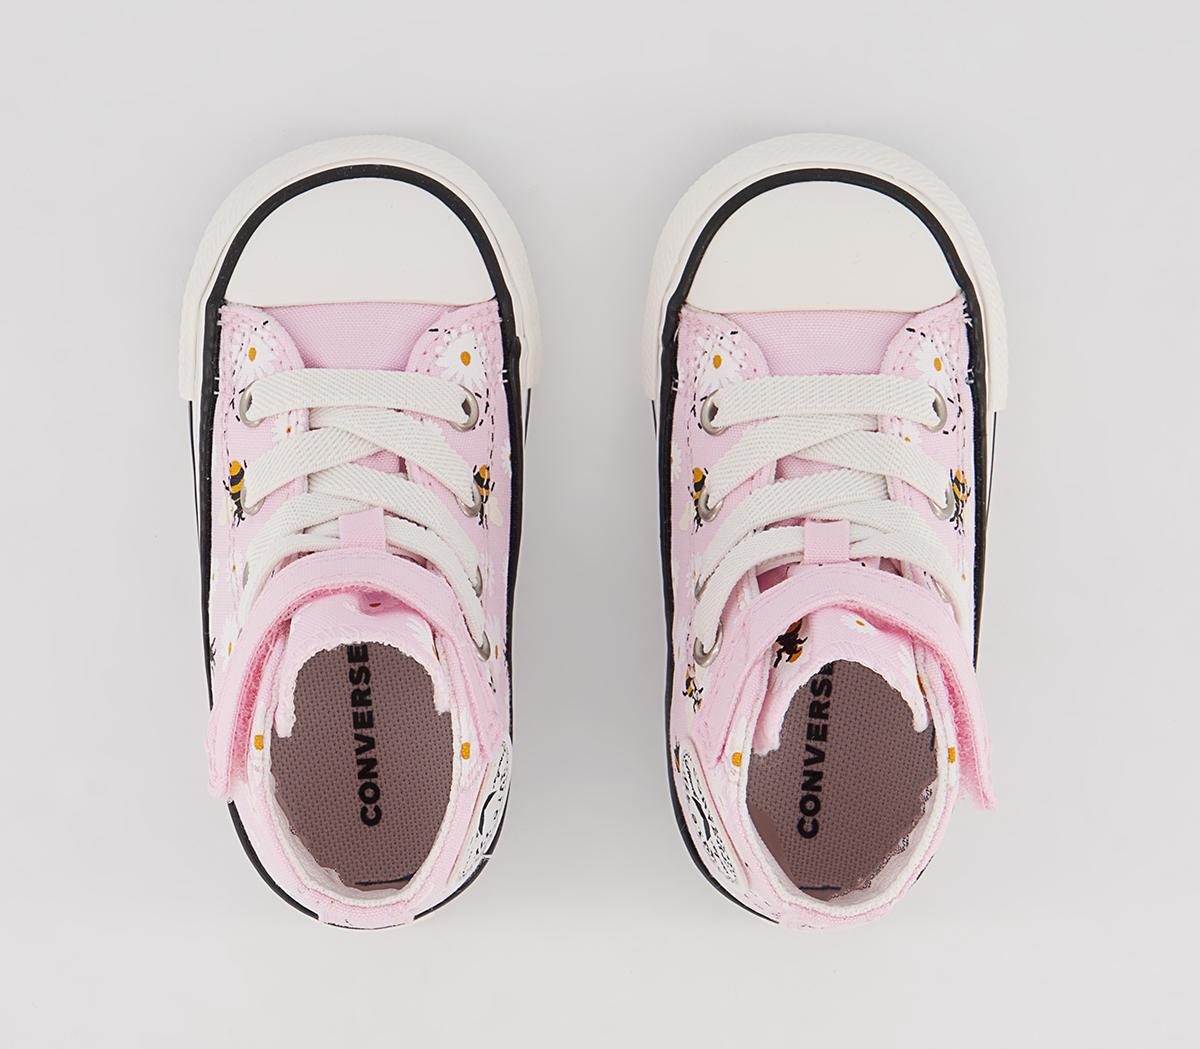 Converse All Star Hi 1vlace Trainers Pink Foam White Black Bee - Unisex